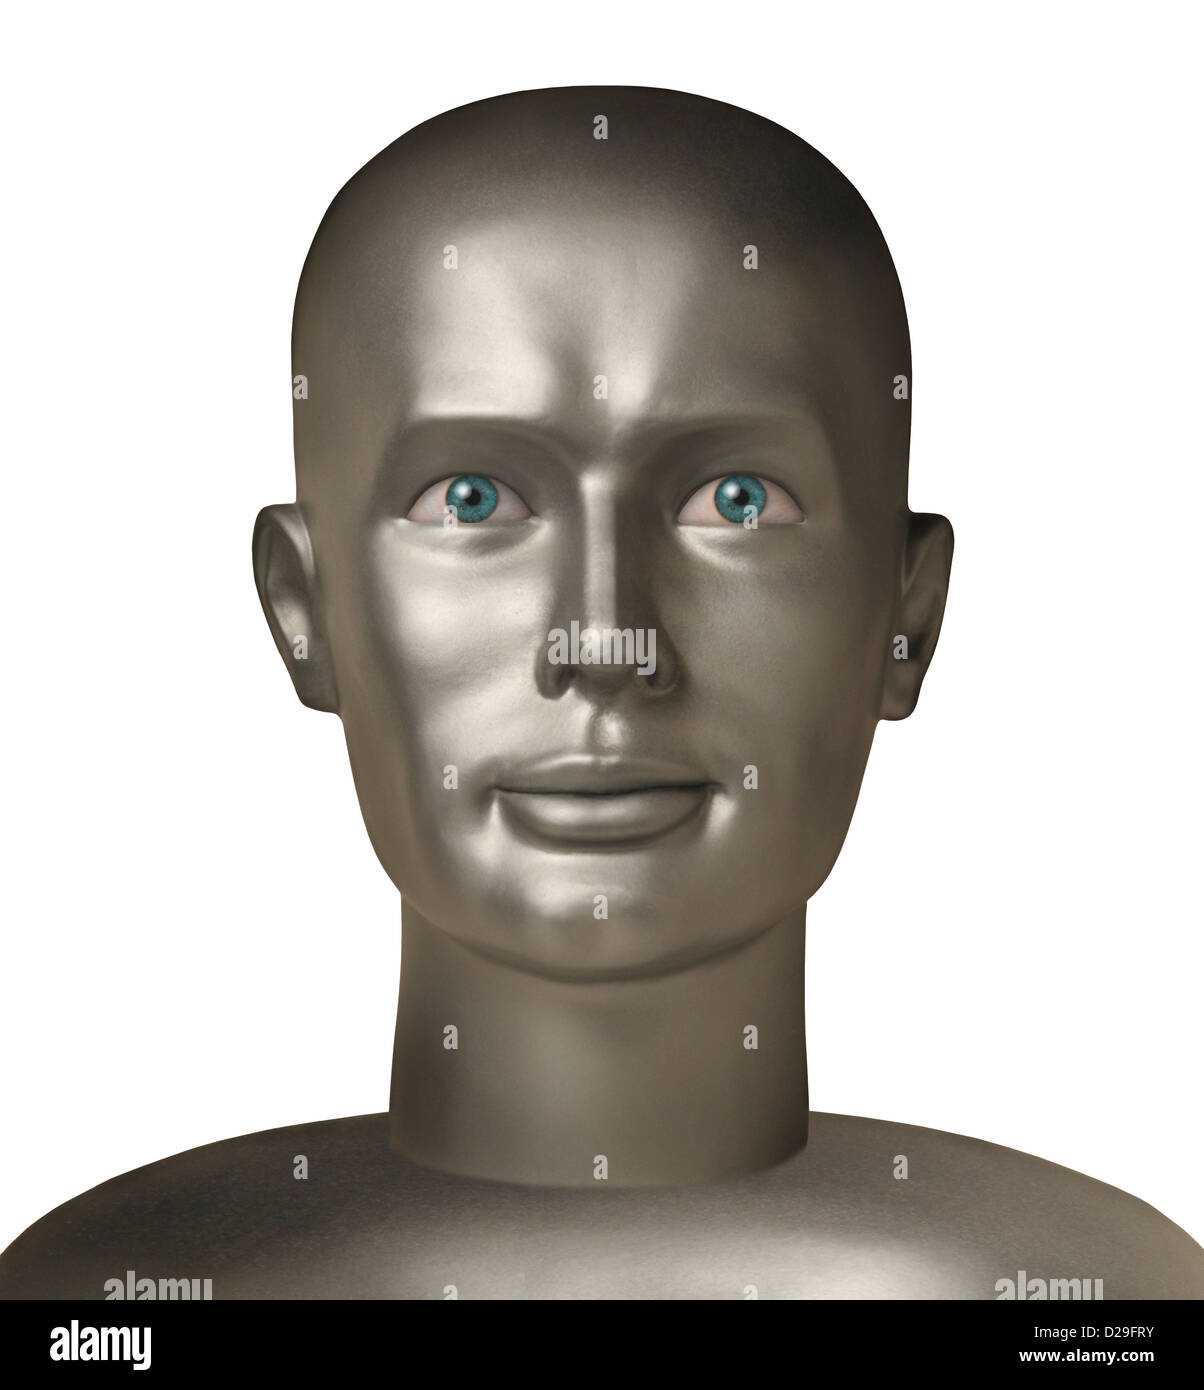 Android head with human eyes agains Stock Photo